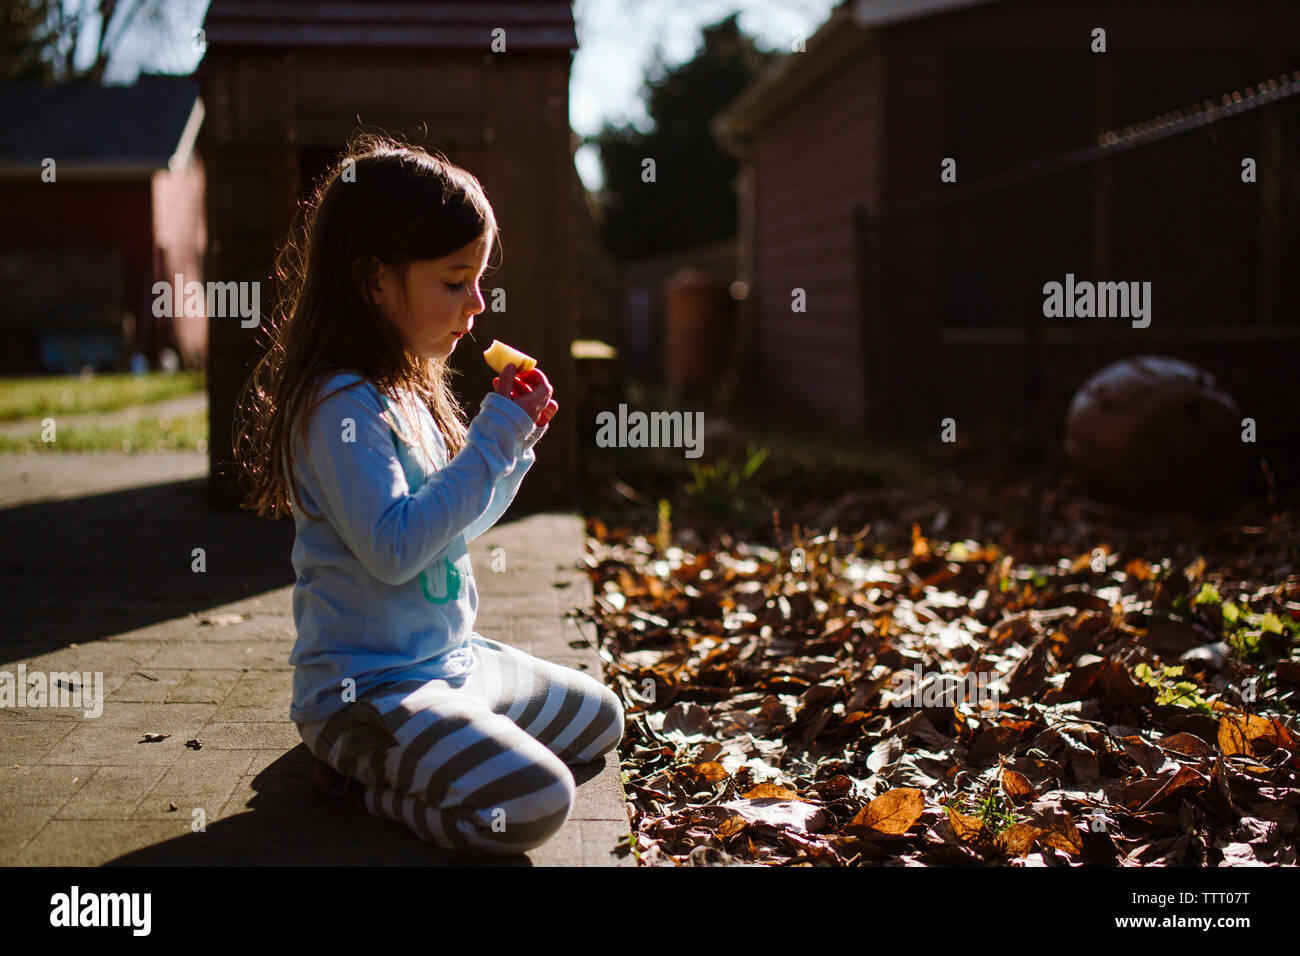 A little girl sits in her yard in golden light eating an apple slice Stock Photo